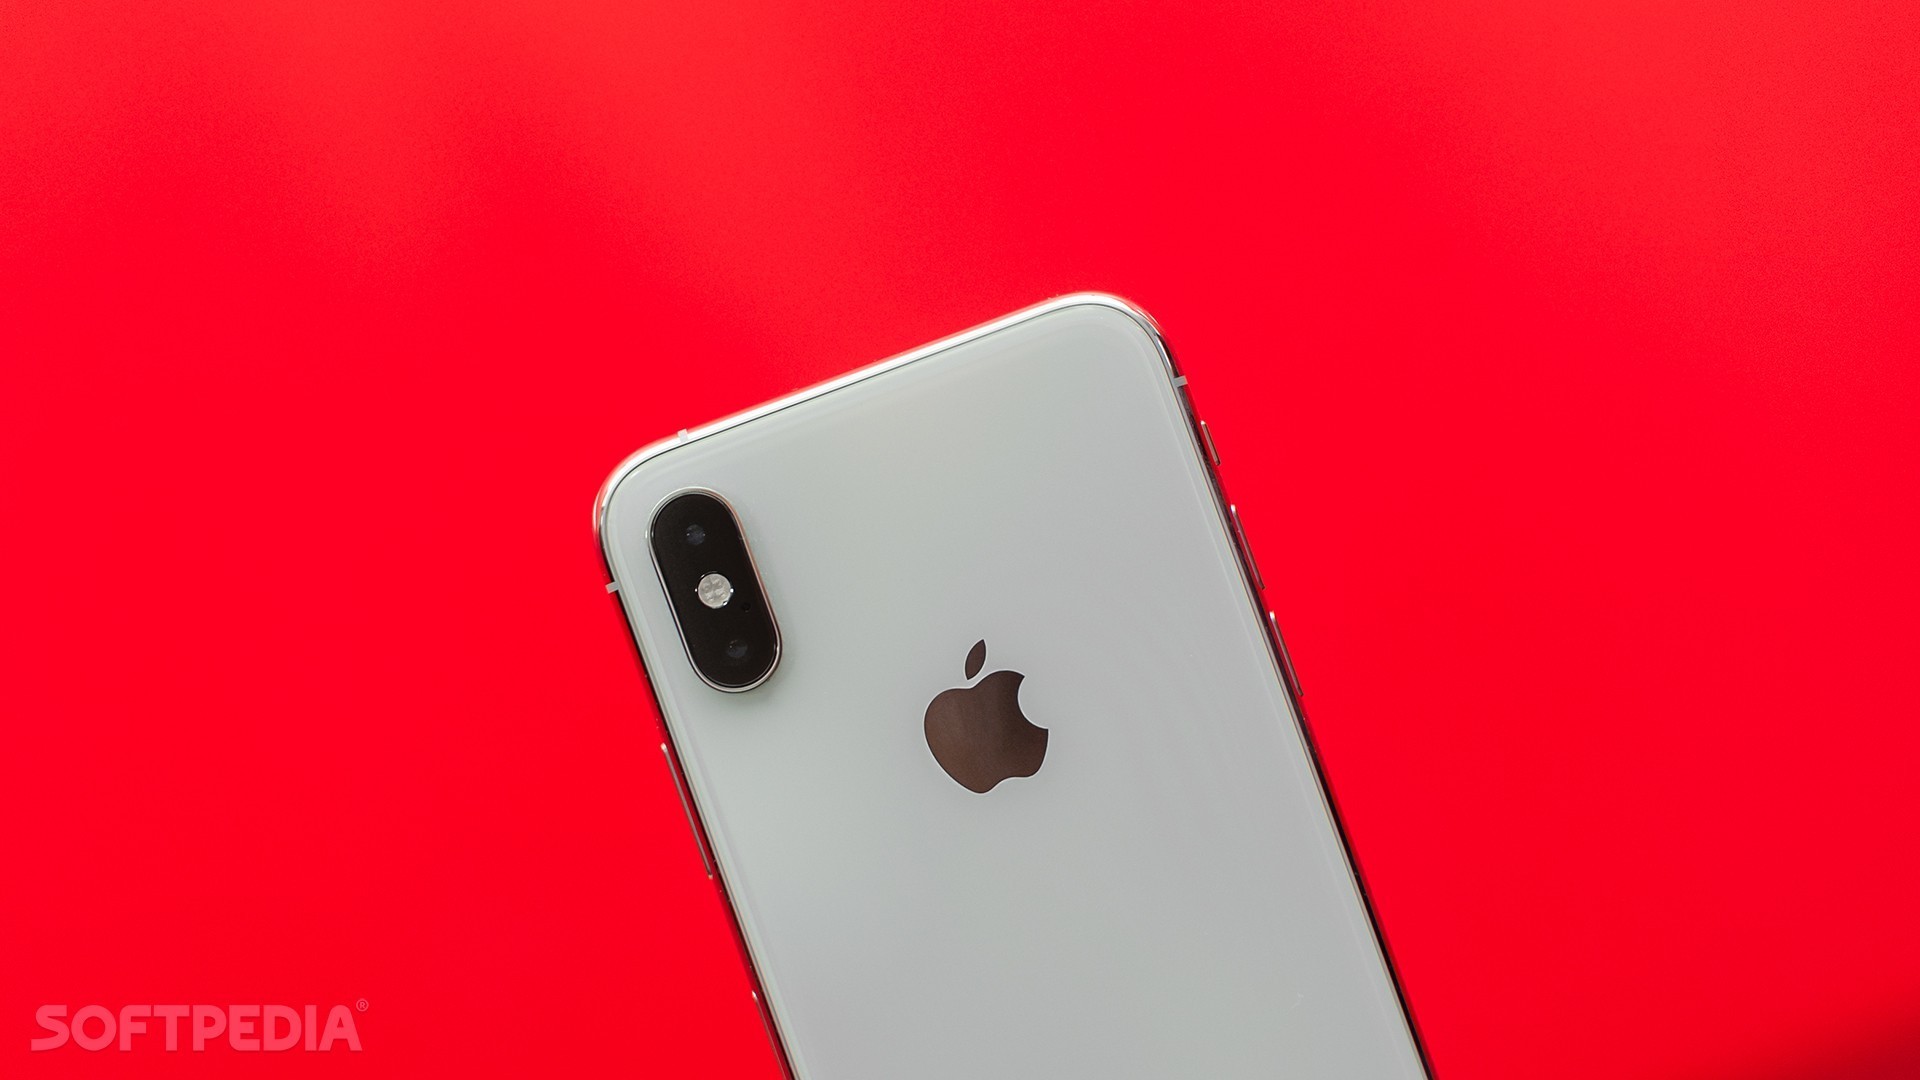 One of the most anticipated iphone features will launch in 2020 526880 2